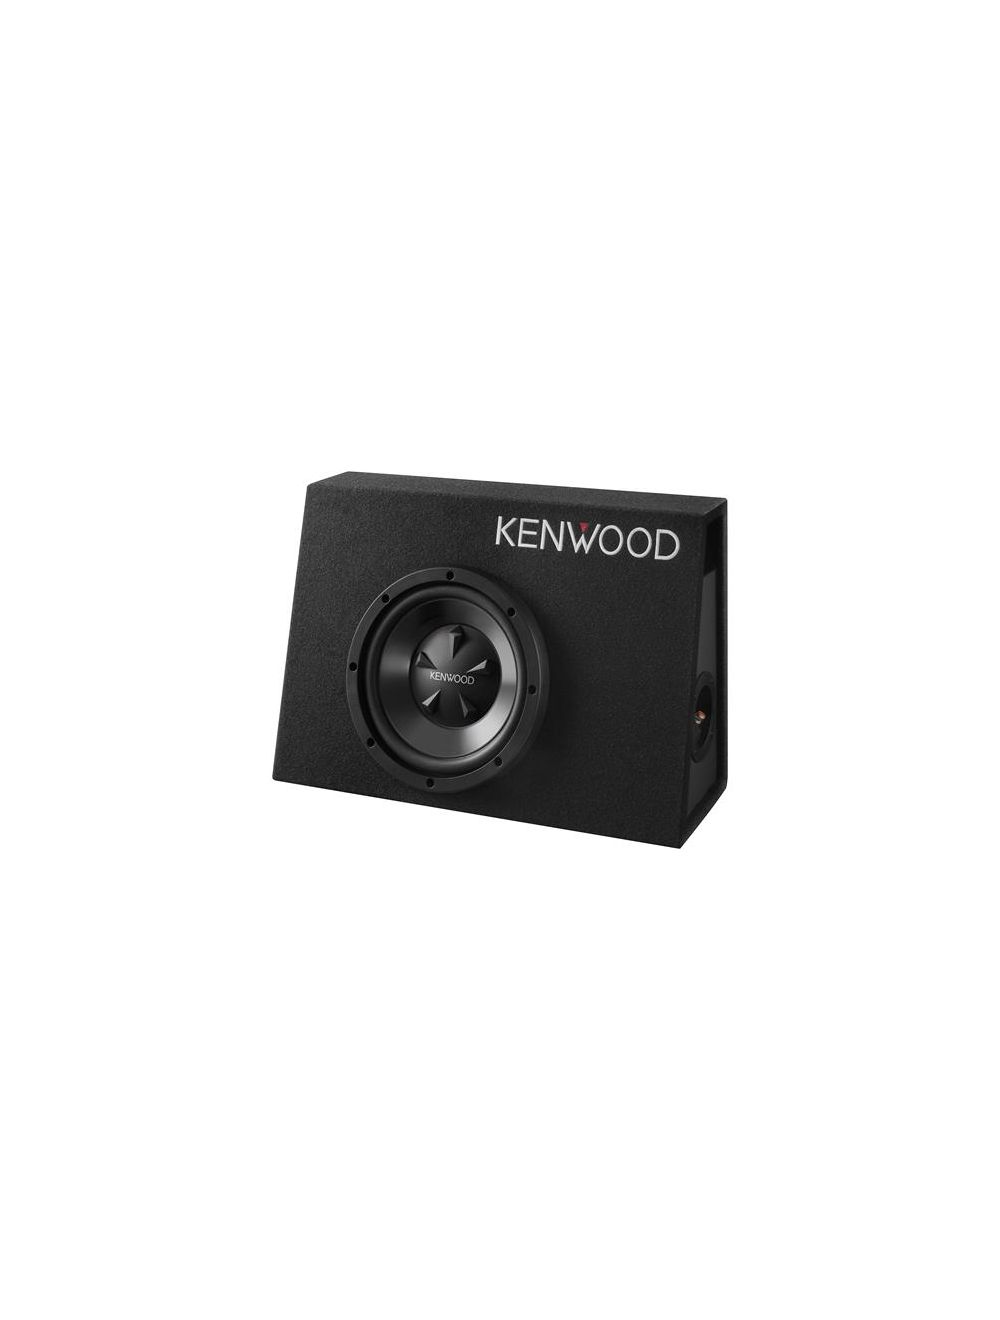 Kenwood P-W100B 150-Watt Bass Package 10" ported truck and KAC-5206 + KFC-W110S Built-in Subwoofer Box